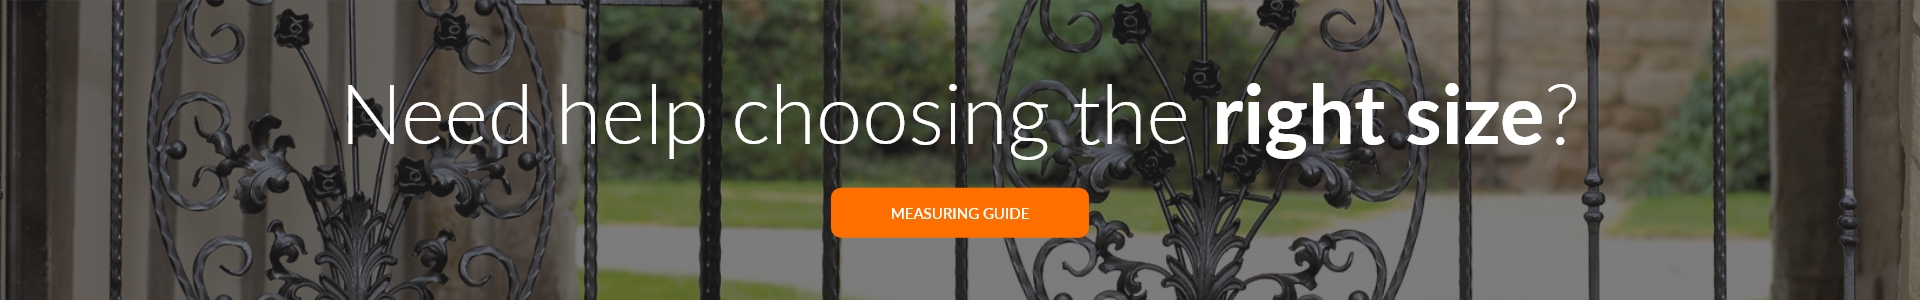 Refer to our measuring guide for help with ordering sizes